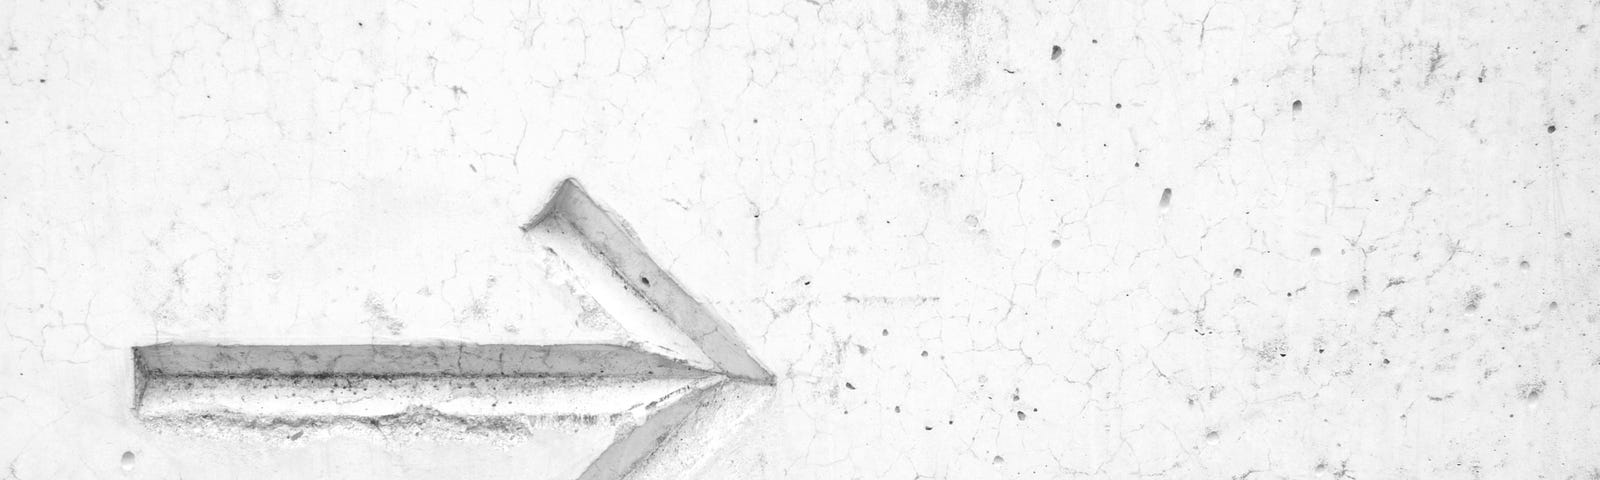 An indented arrow pointing right on a grey concrete background. It looks a bit like Common Collective’s logo.